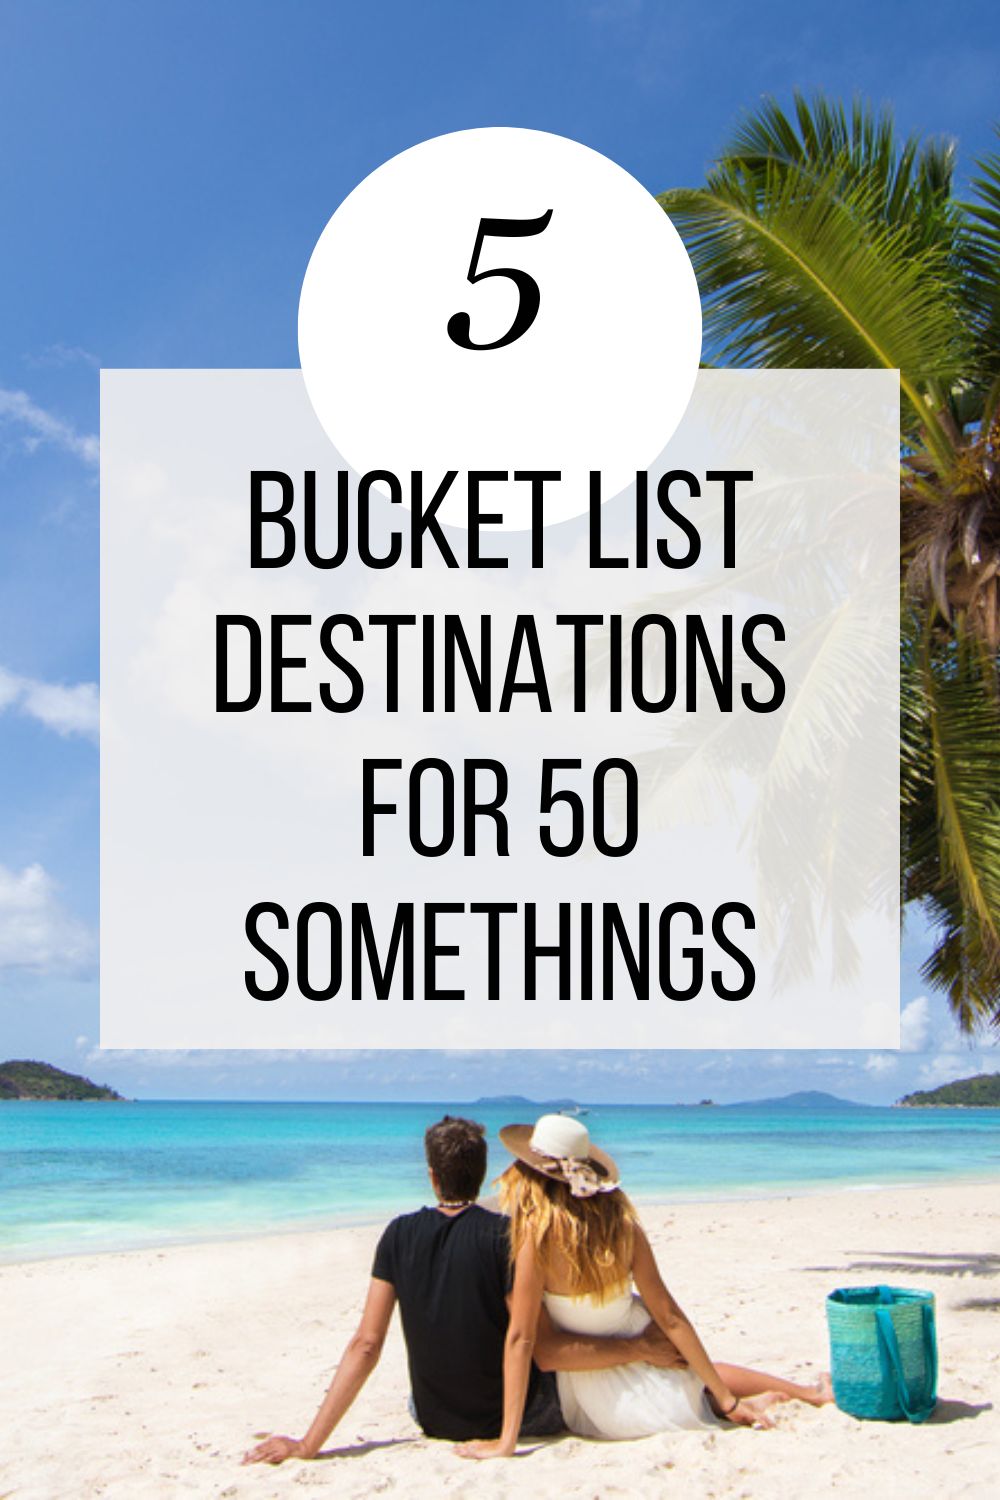 Top 5 Bucket List Destinations for 50 Somethings